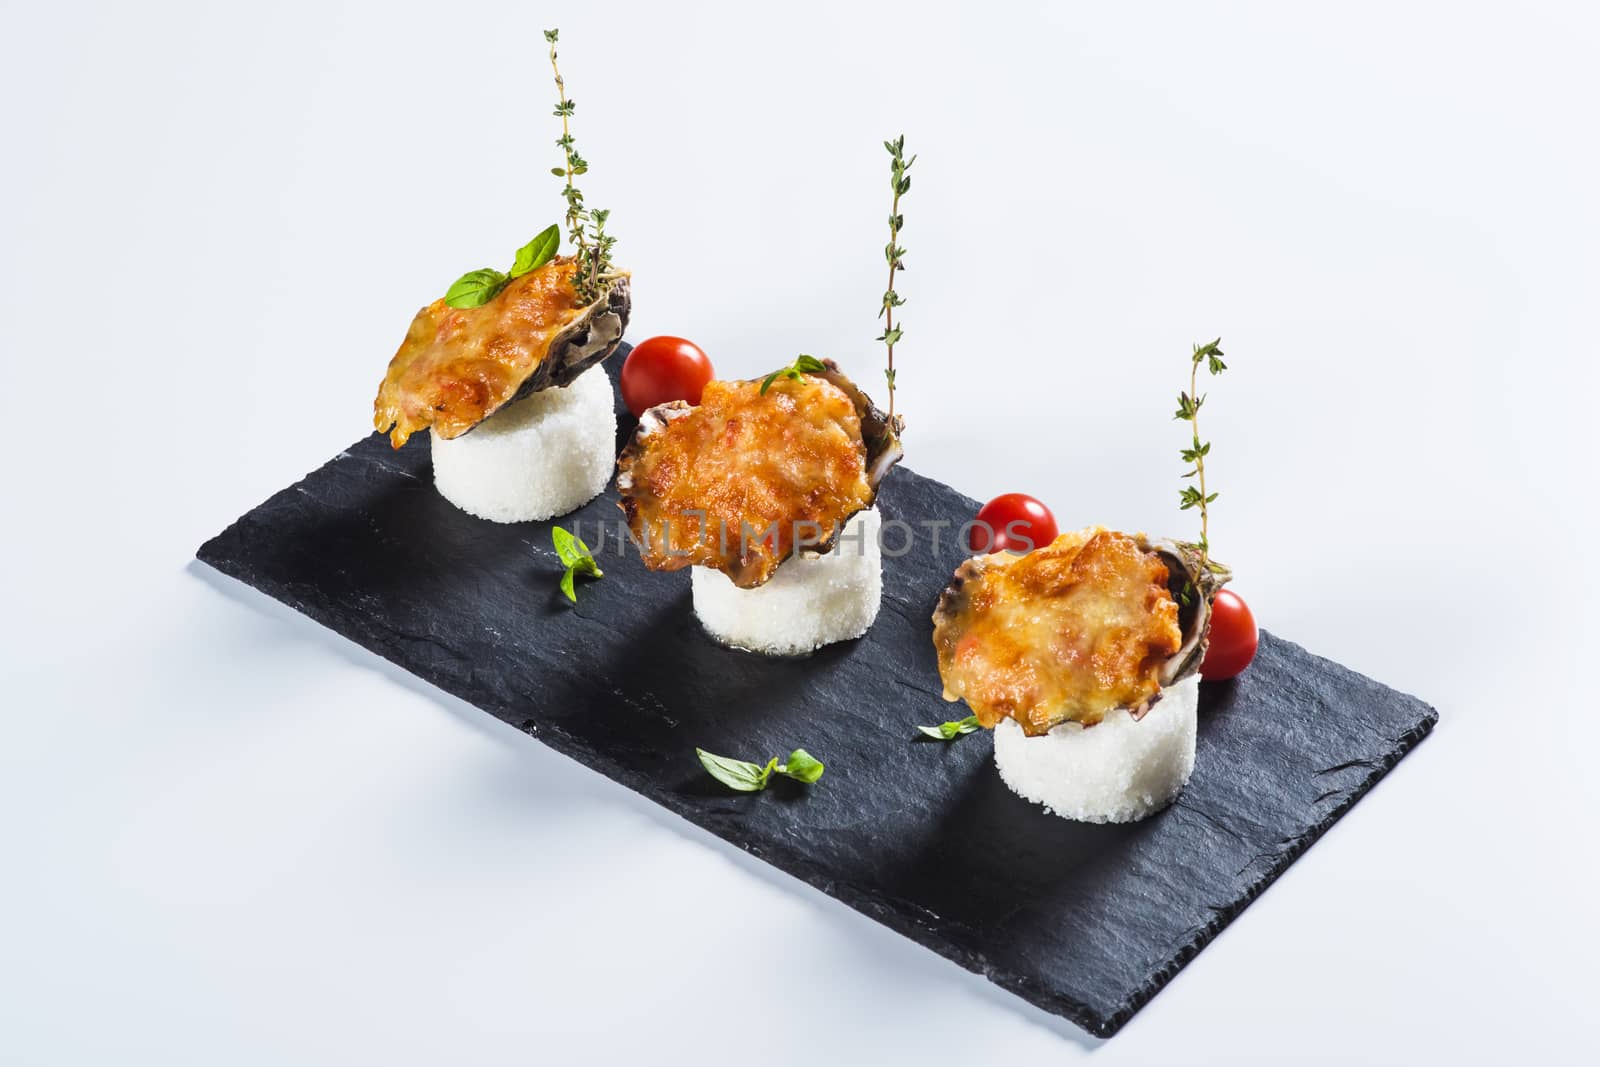 Beautifully decorated  baked oyster  with cheese on plate on  light background